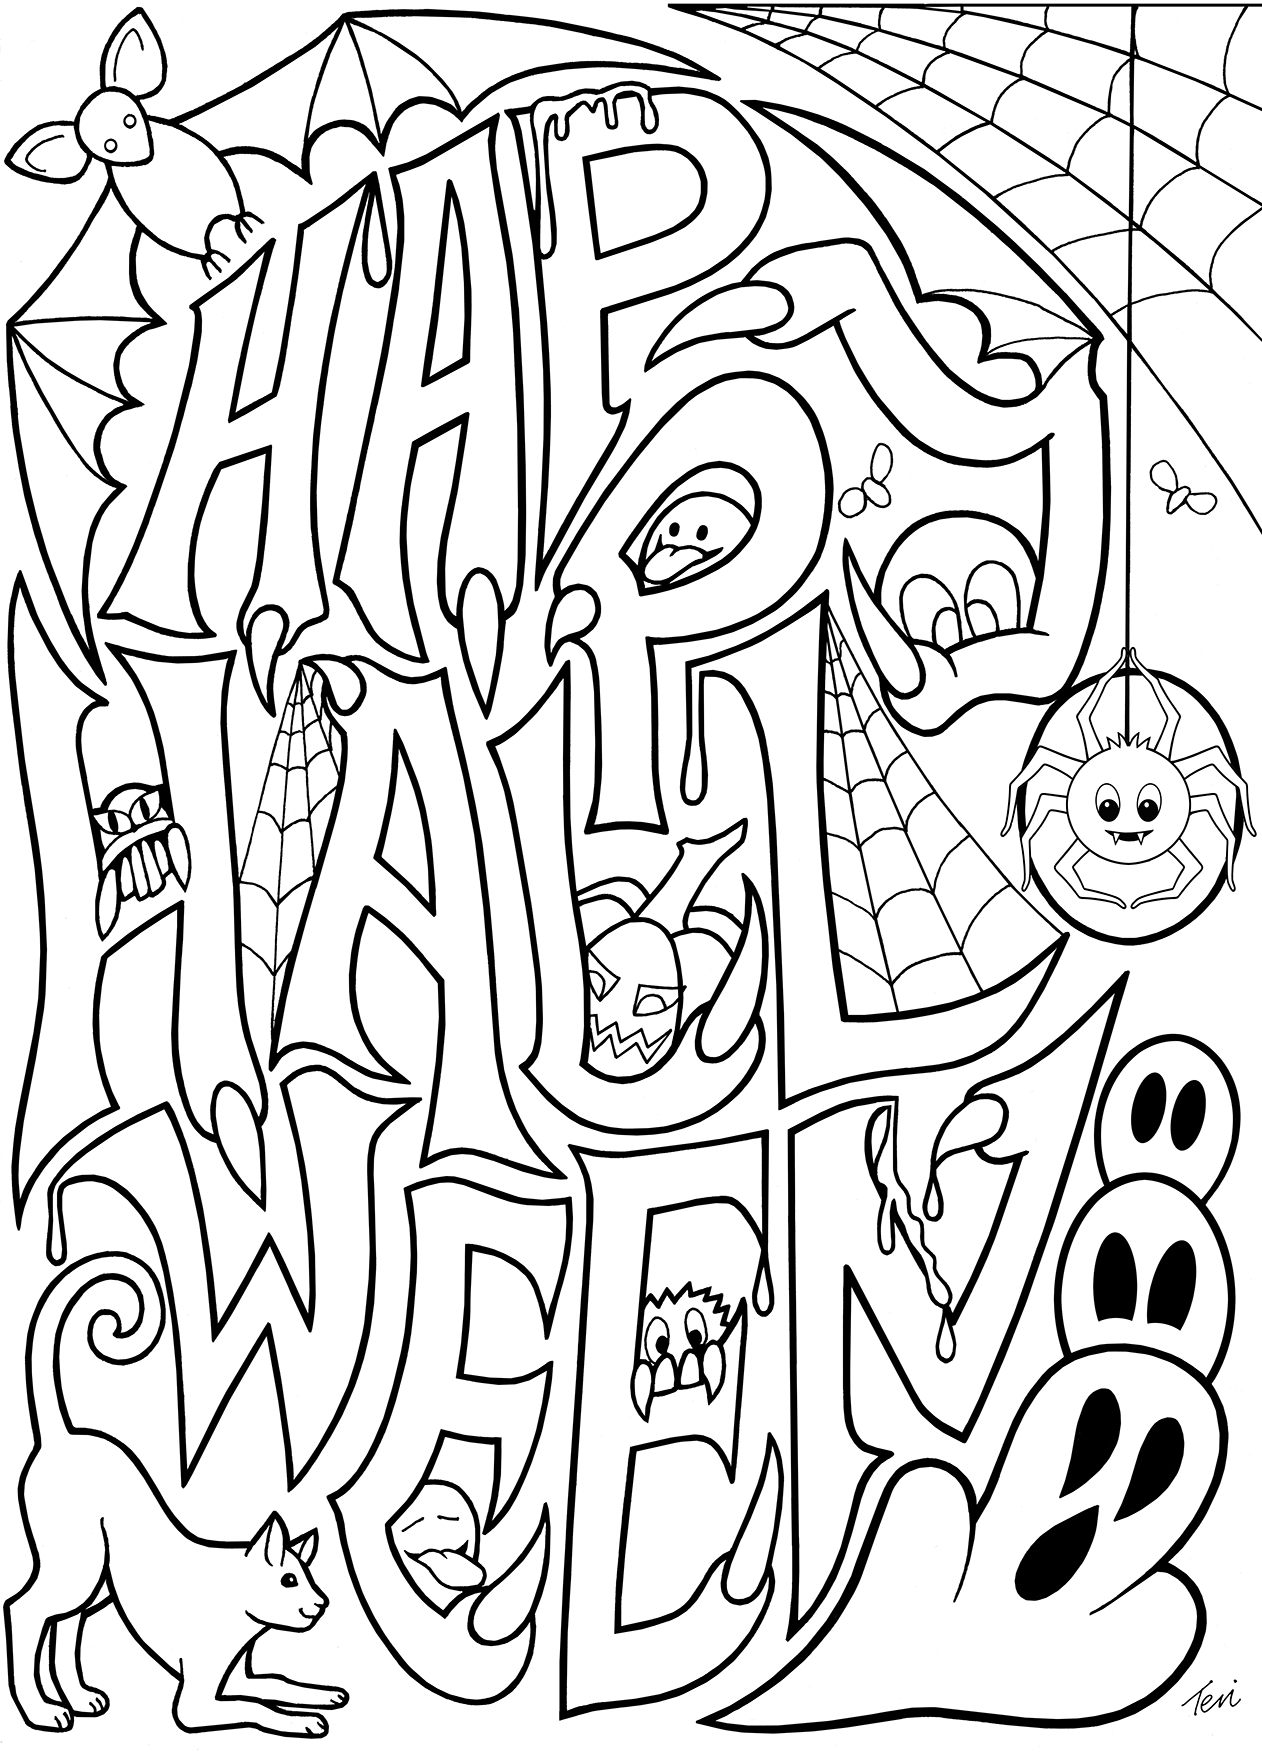 get-coloring-pages-halloween-images-colorist